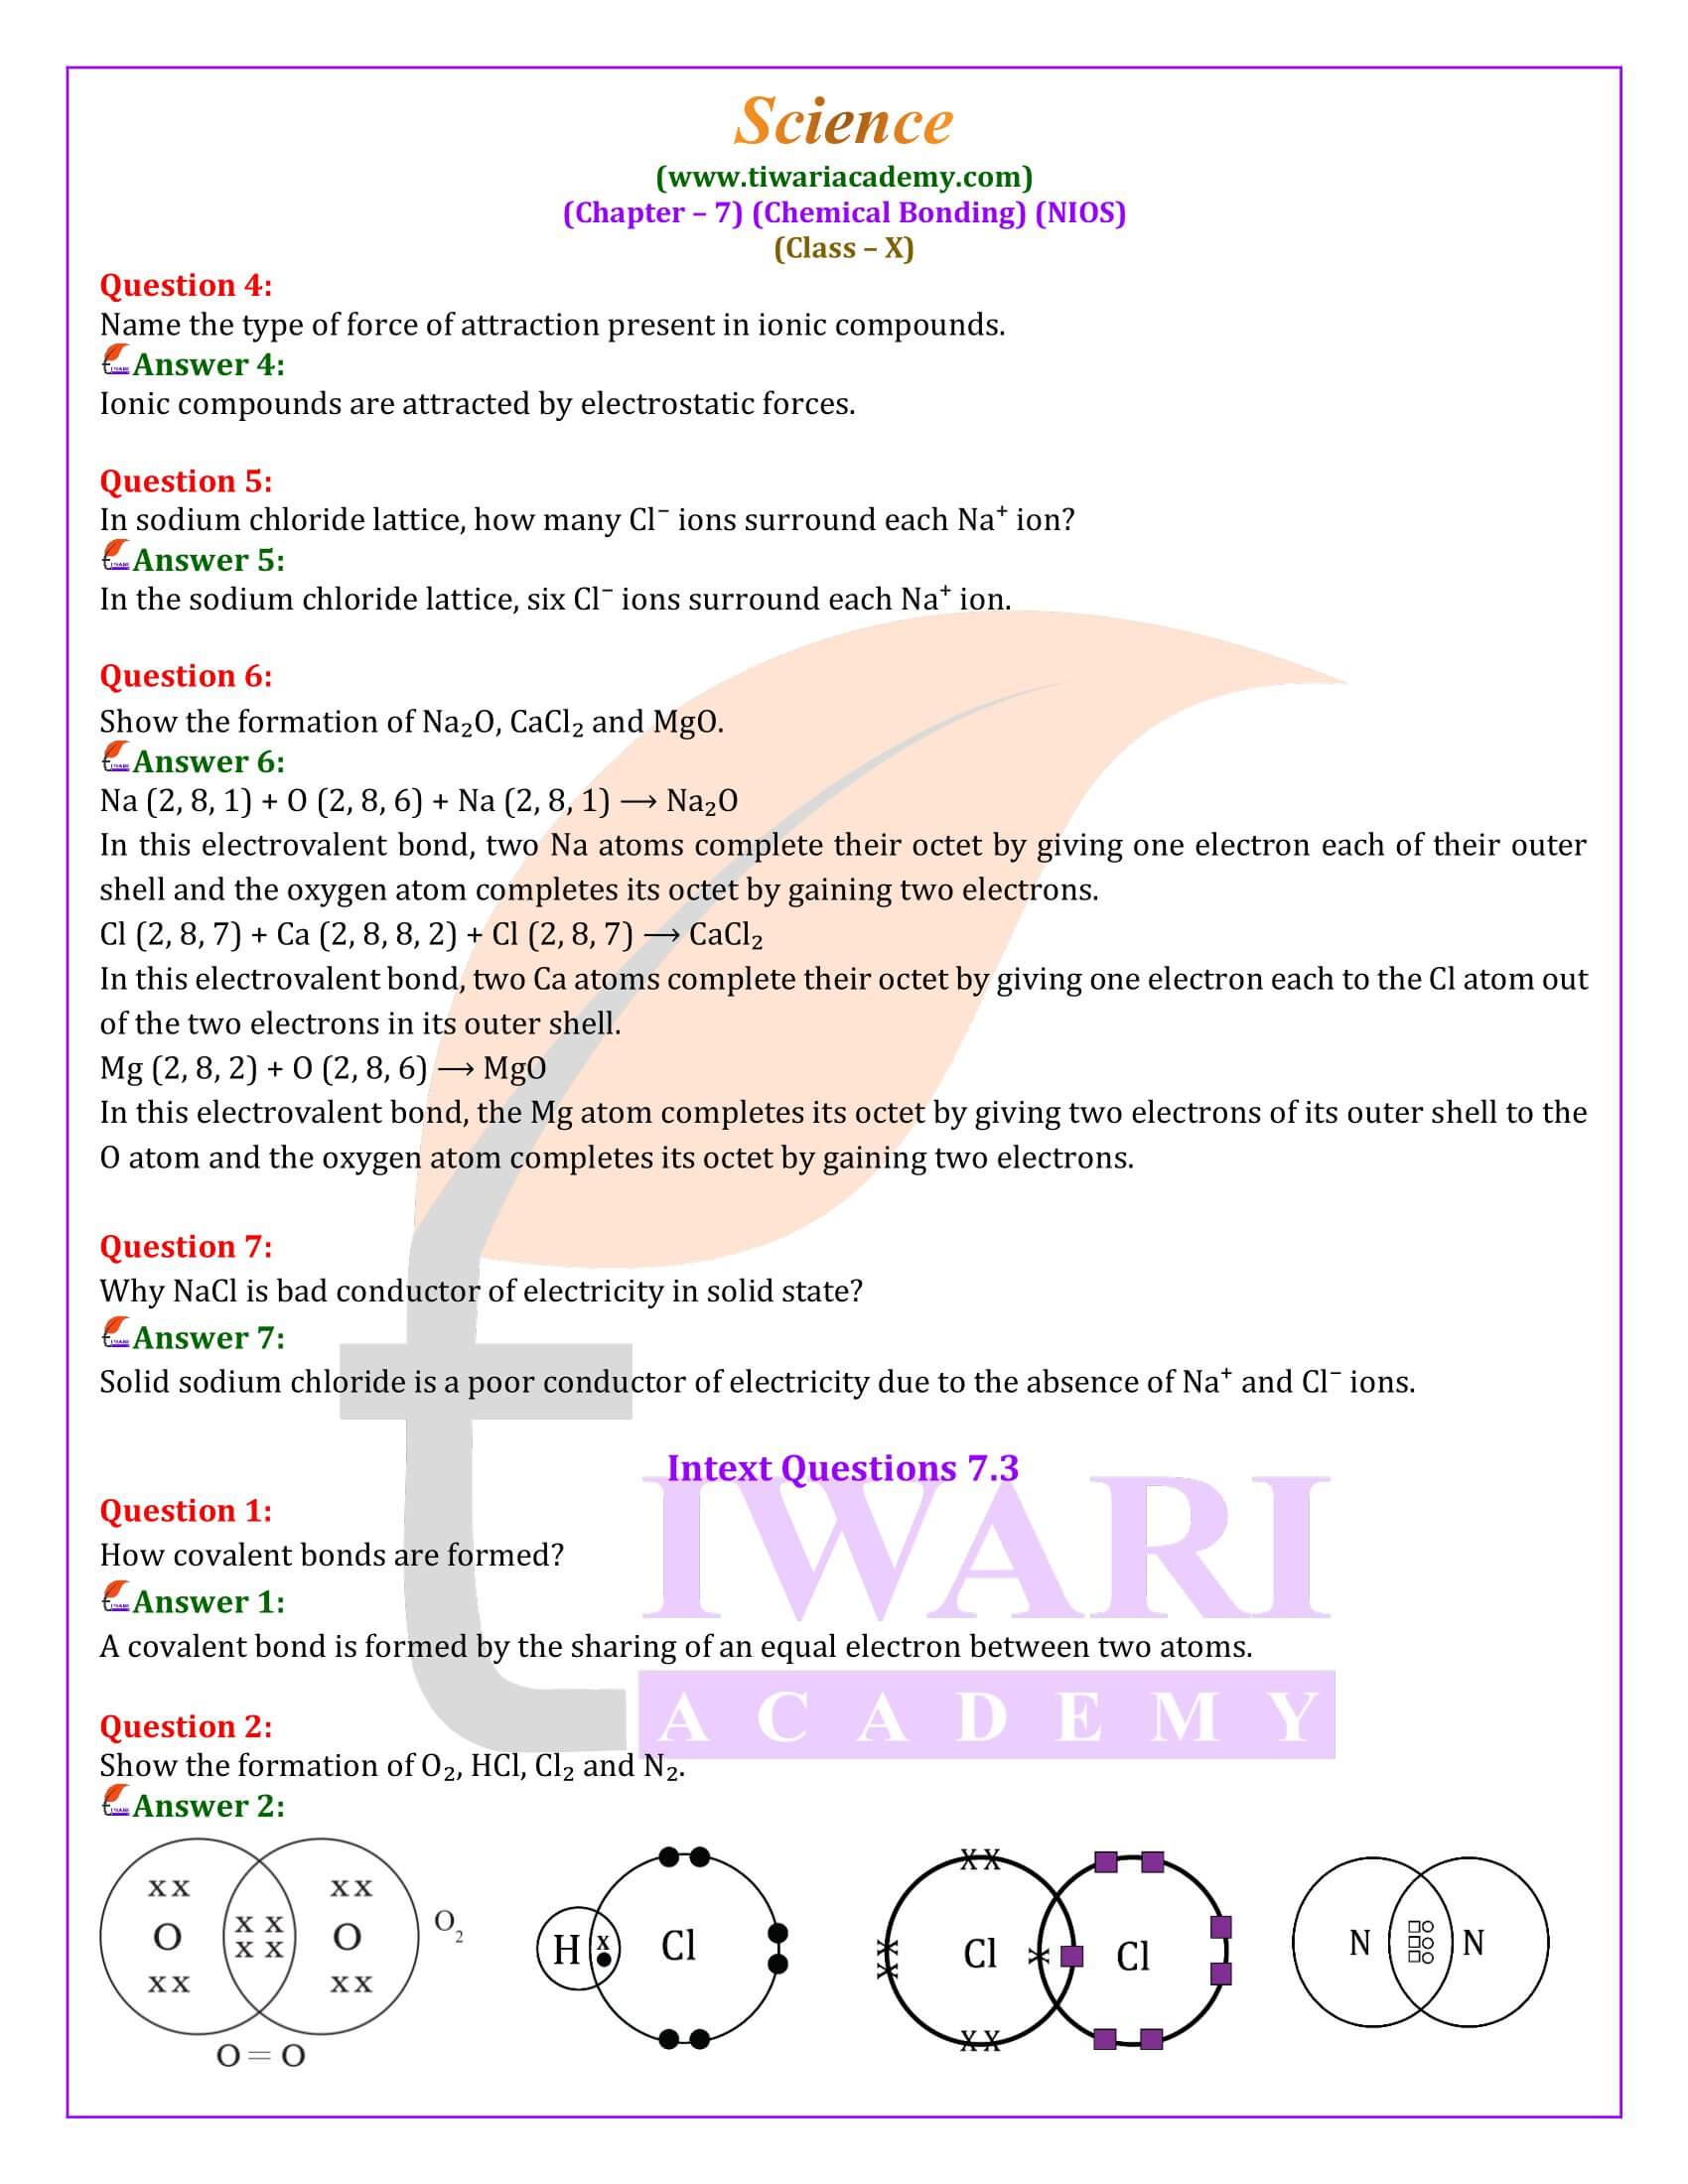 NIOS Class 10 Science Chapter 7 Chemical Bonding Guide in Hindi